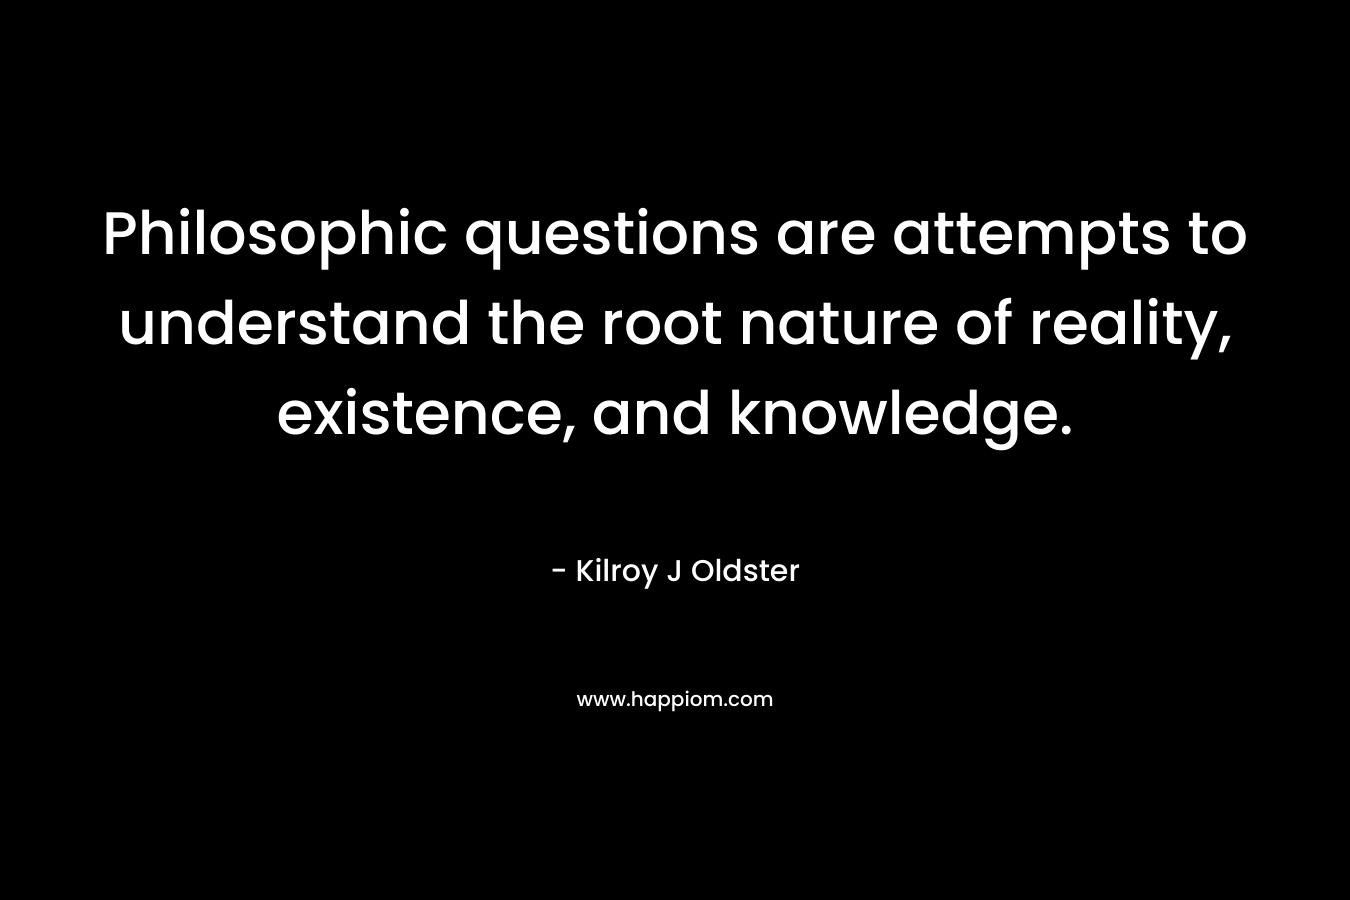 Philosophic questions are attempts to understand the root nature of reality, existence, and knowledge. – Kilroy J Oldster